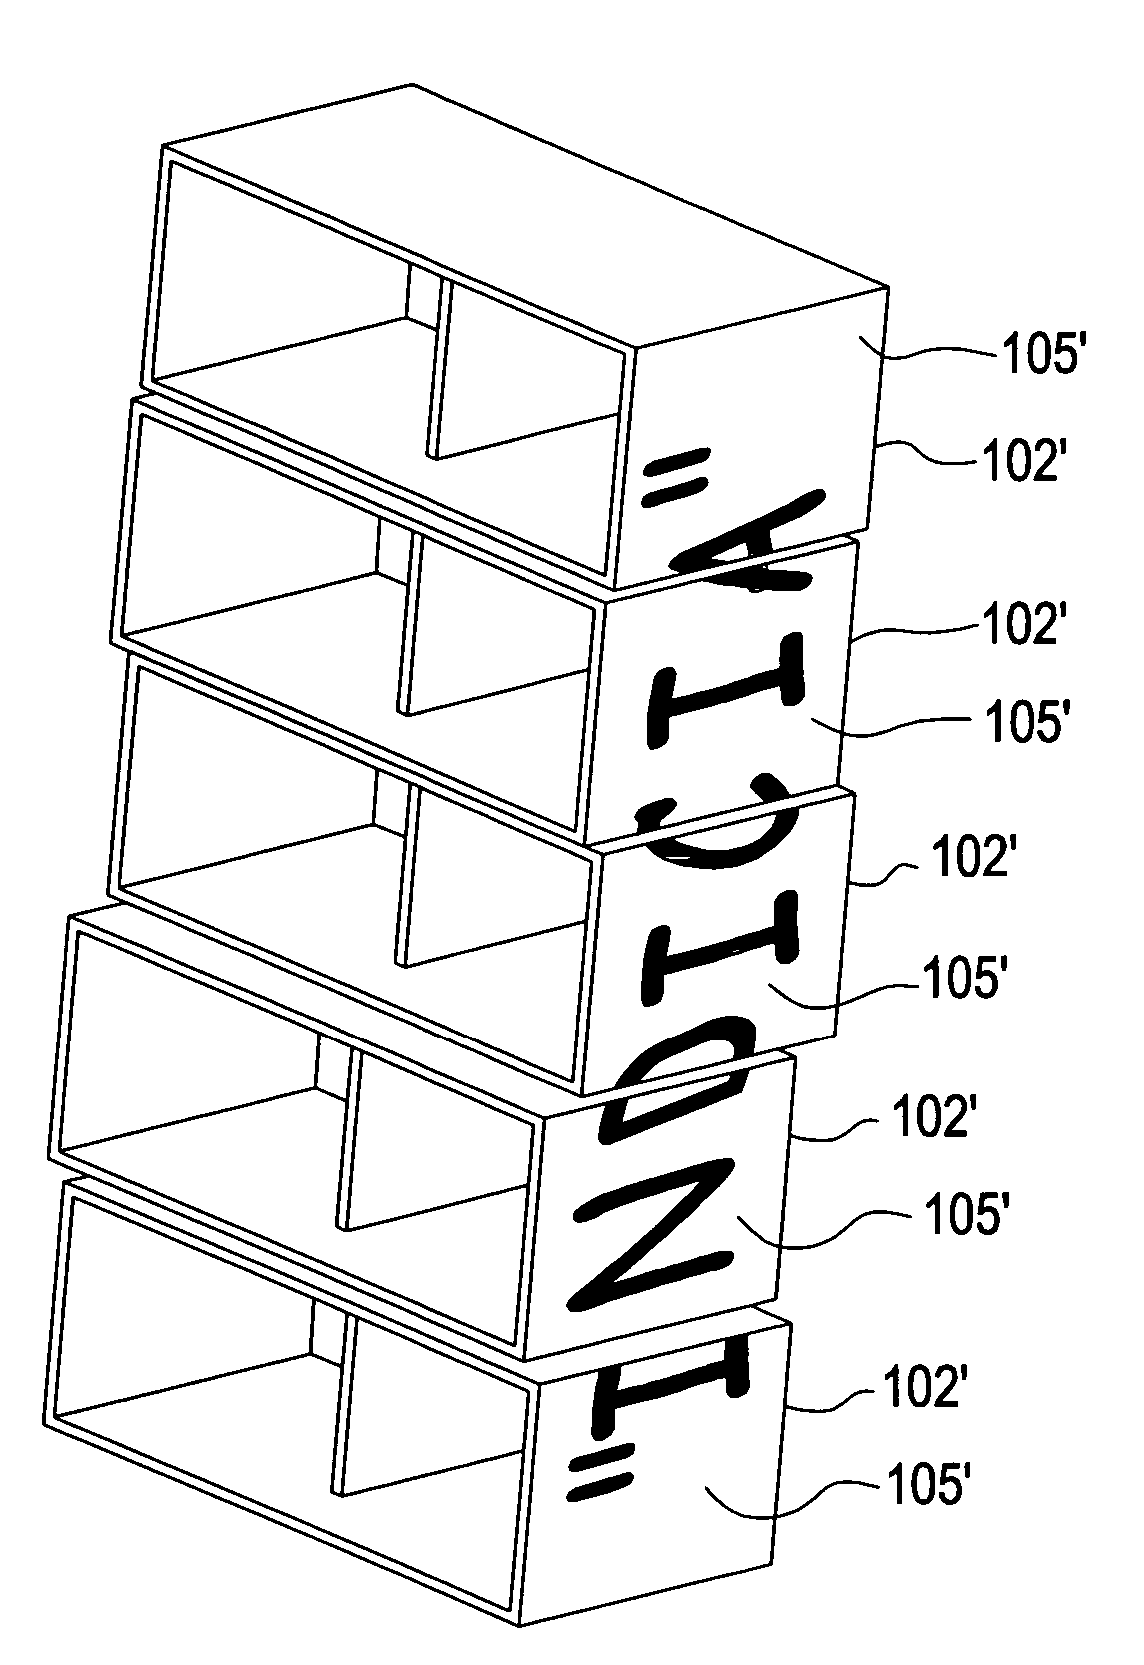 System and method for footwear packaging